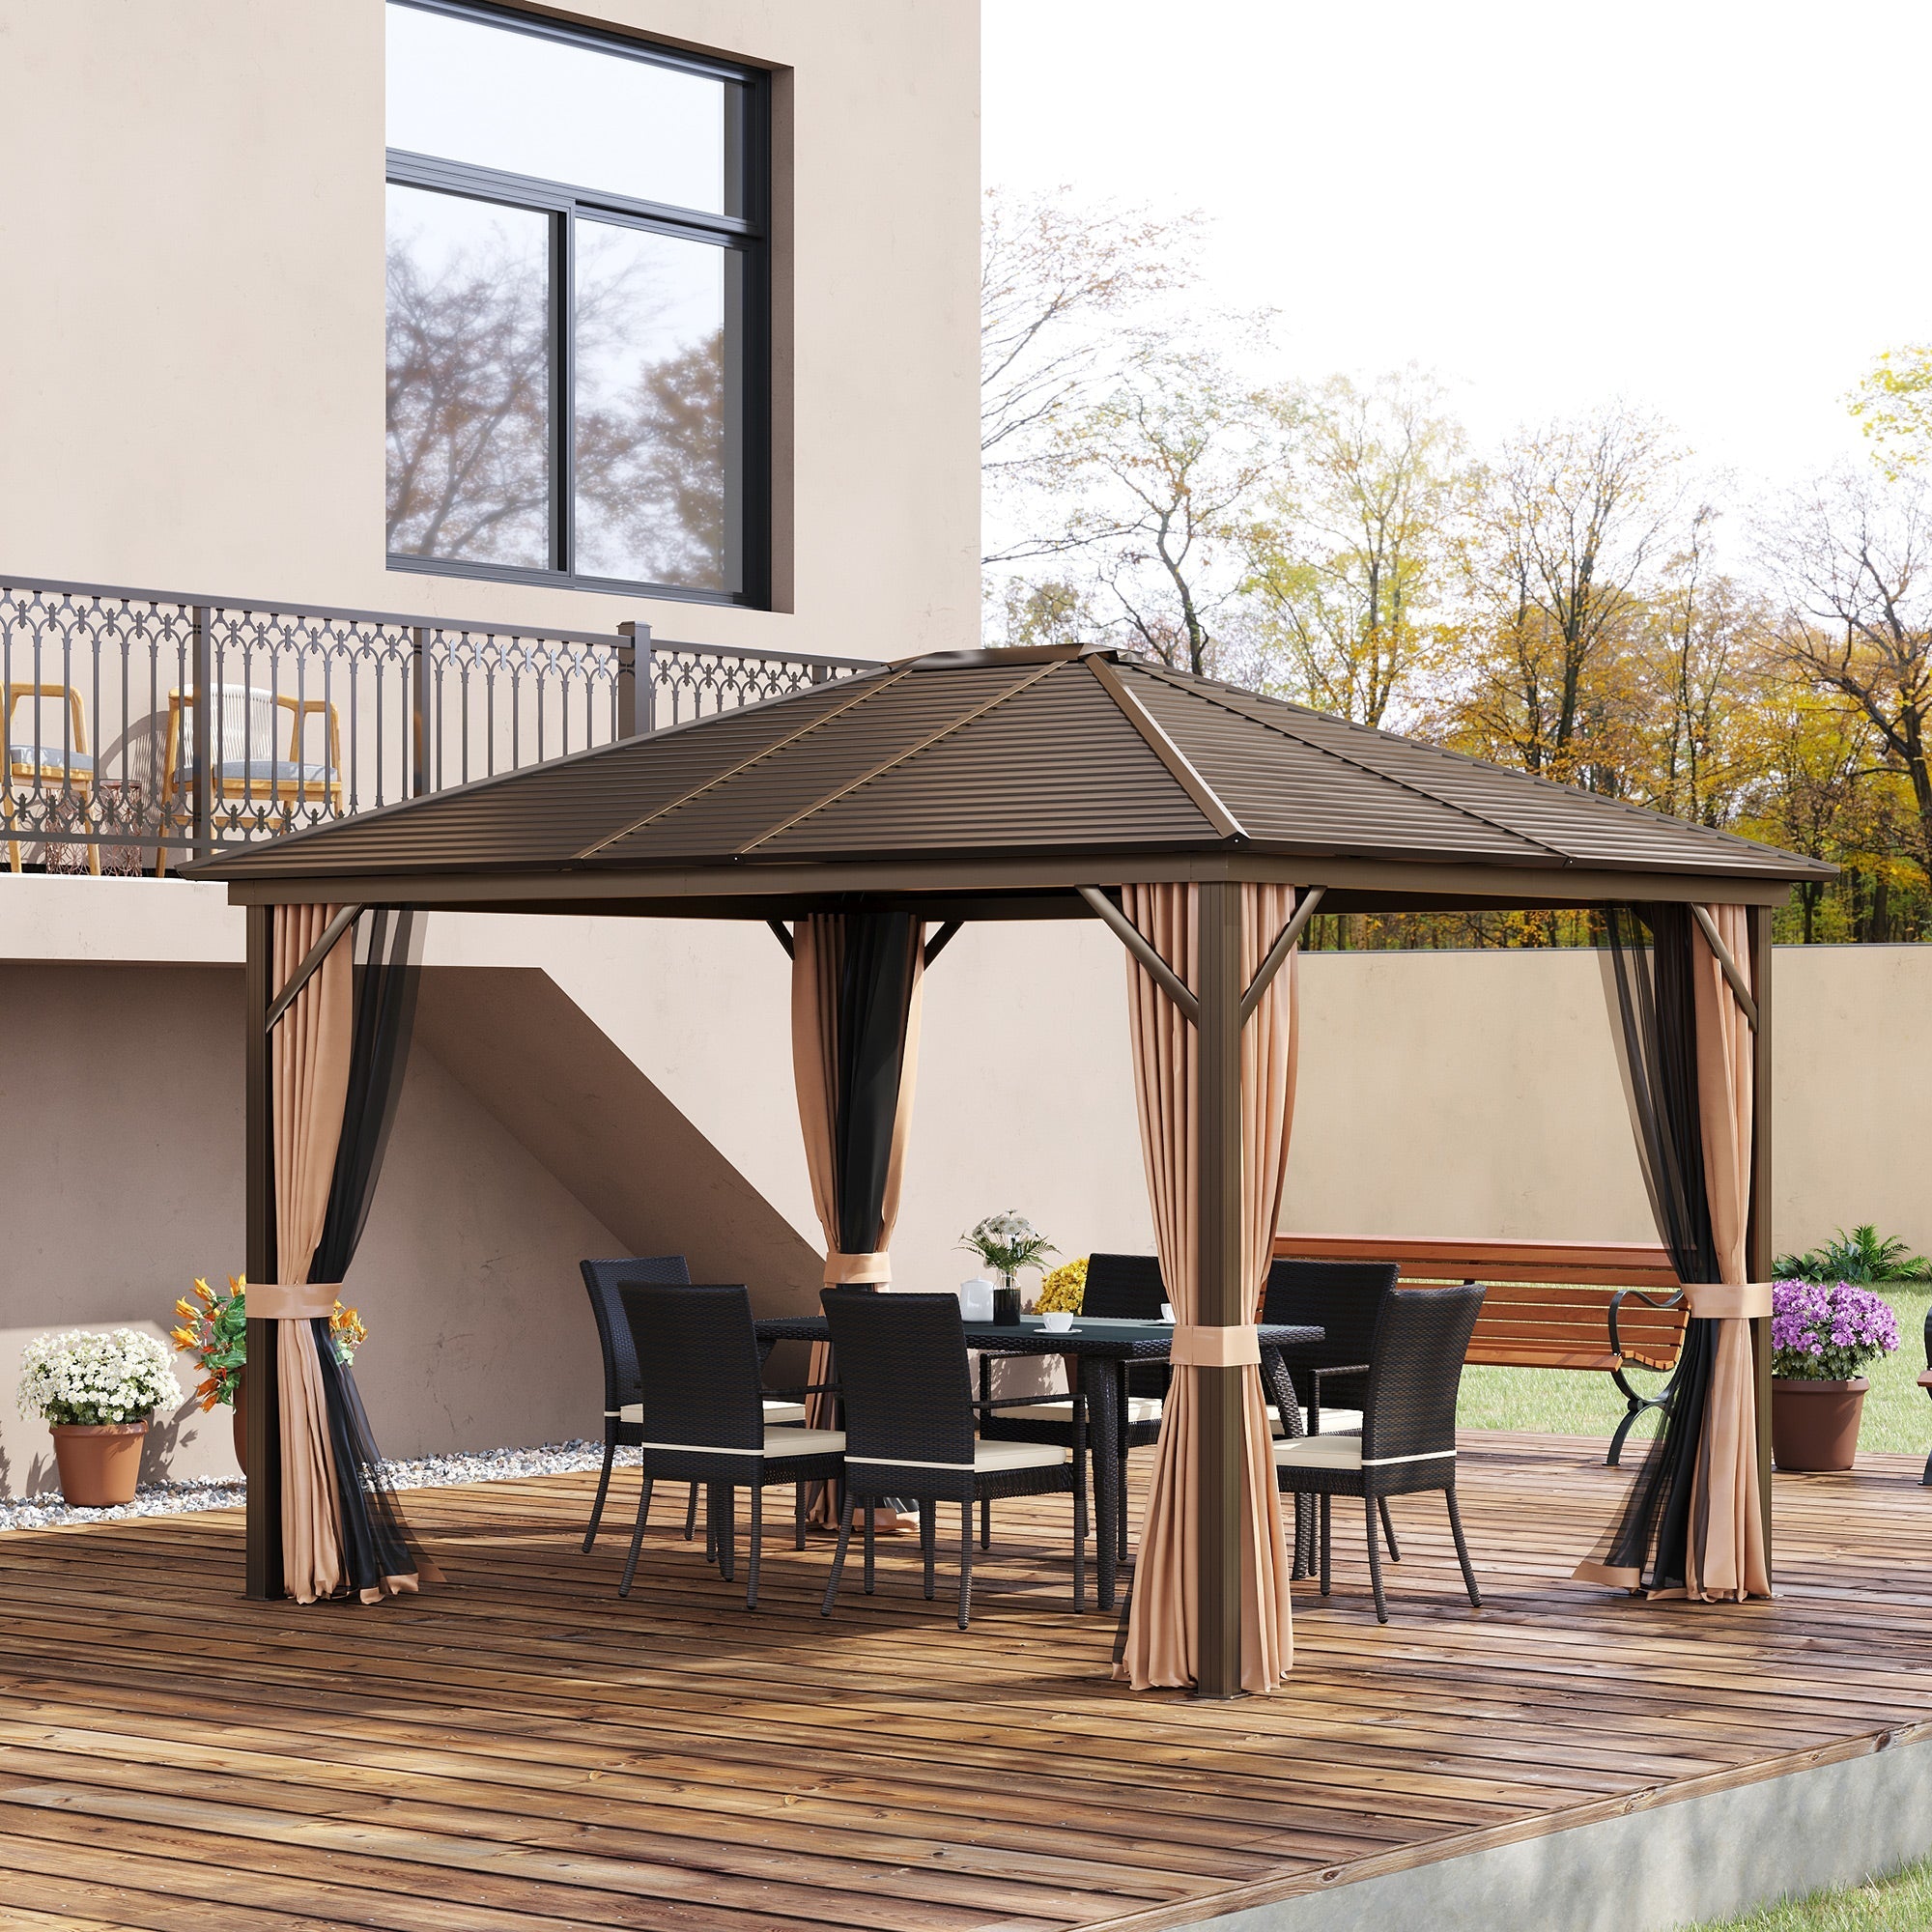 10' x 12' Hardtop Gazebo Steel Covered Gazebo Aluminum Frame Heavy Duty Outdoor Pavilion with Curtains and Netting, Brown Gazebos   at Gallery Canada